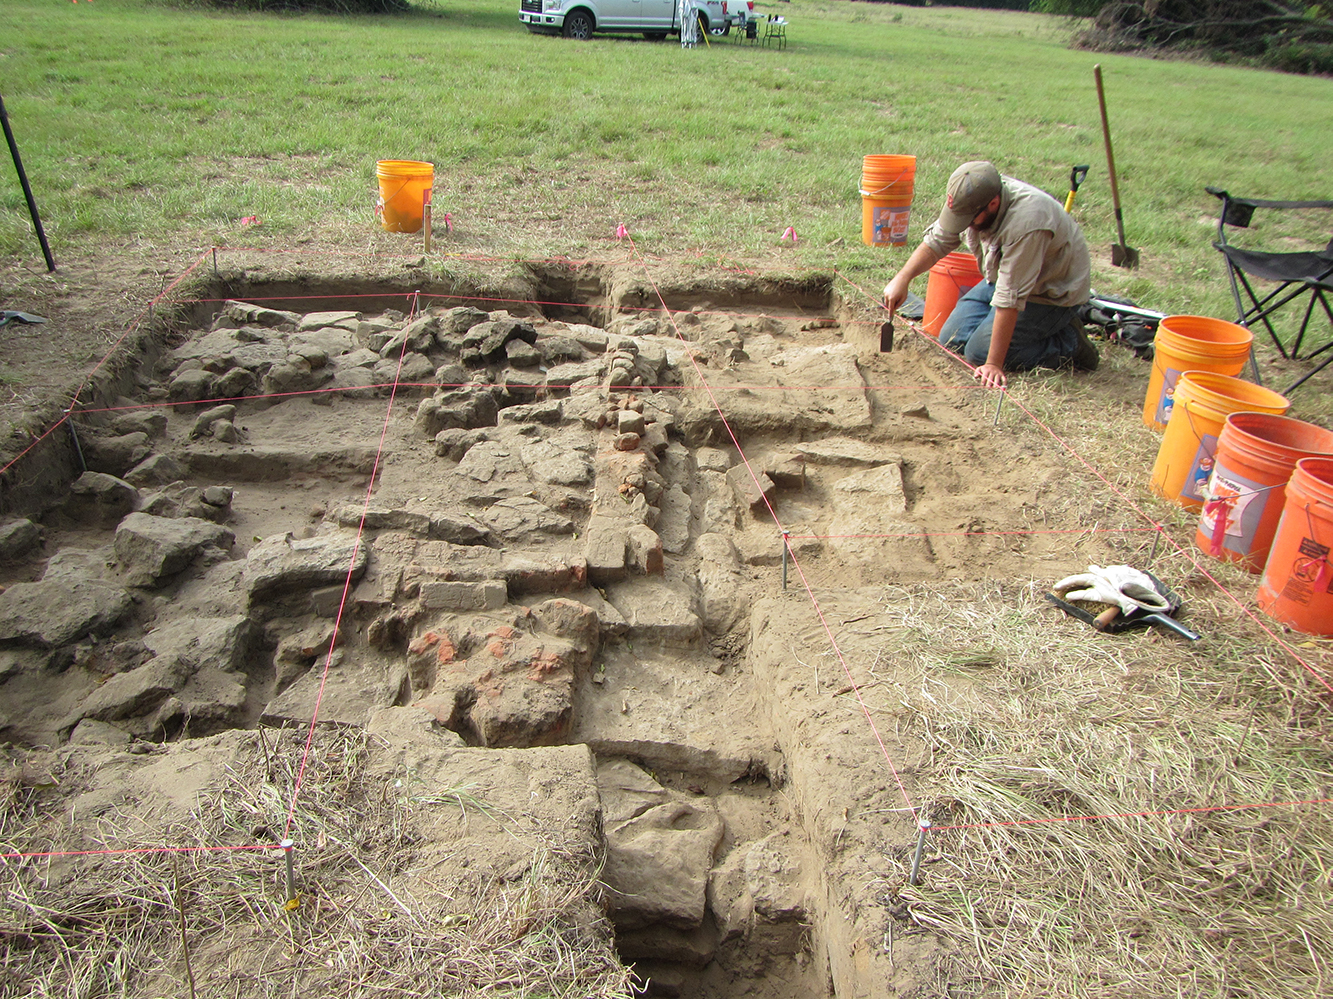 A man kneeling on grass and excavating with a trowel. Several orange buckets are around him. The excavation is shallow, square, and filled with rocks.